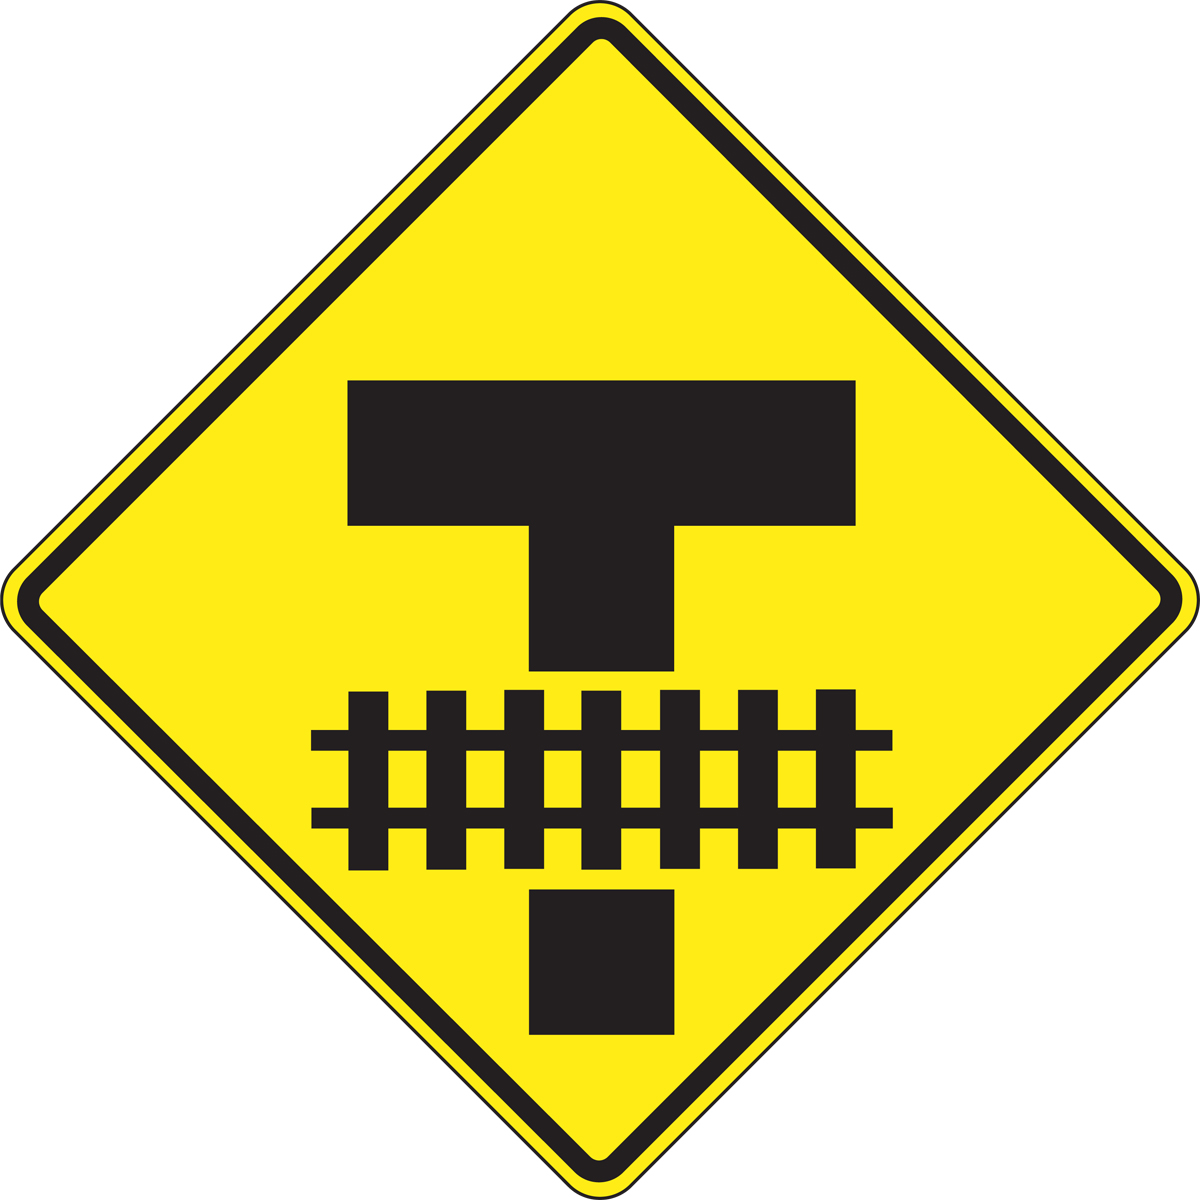 (T-INTERSECTION FOLLOWED BY RAILROAD CROSSING / STORAGE SPACE SIGN) 